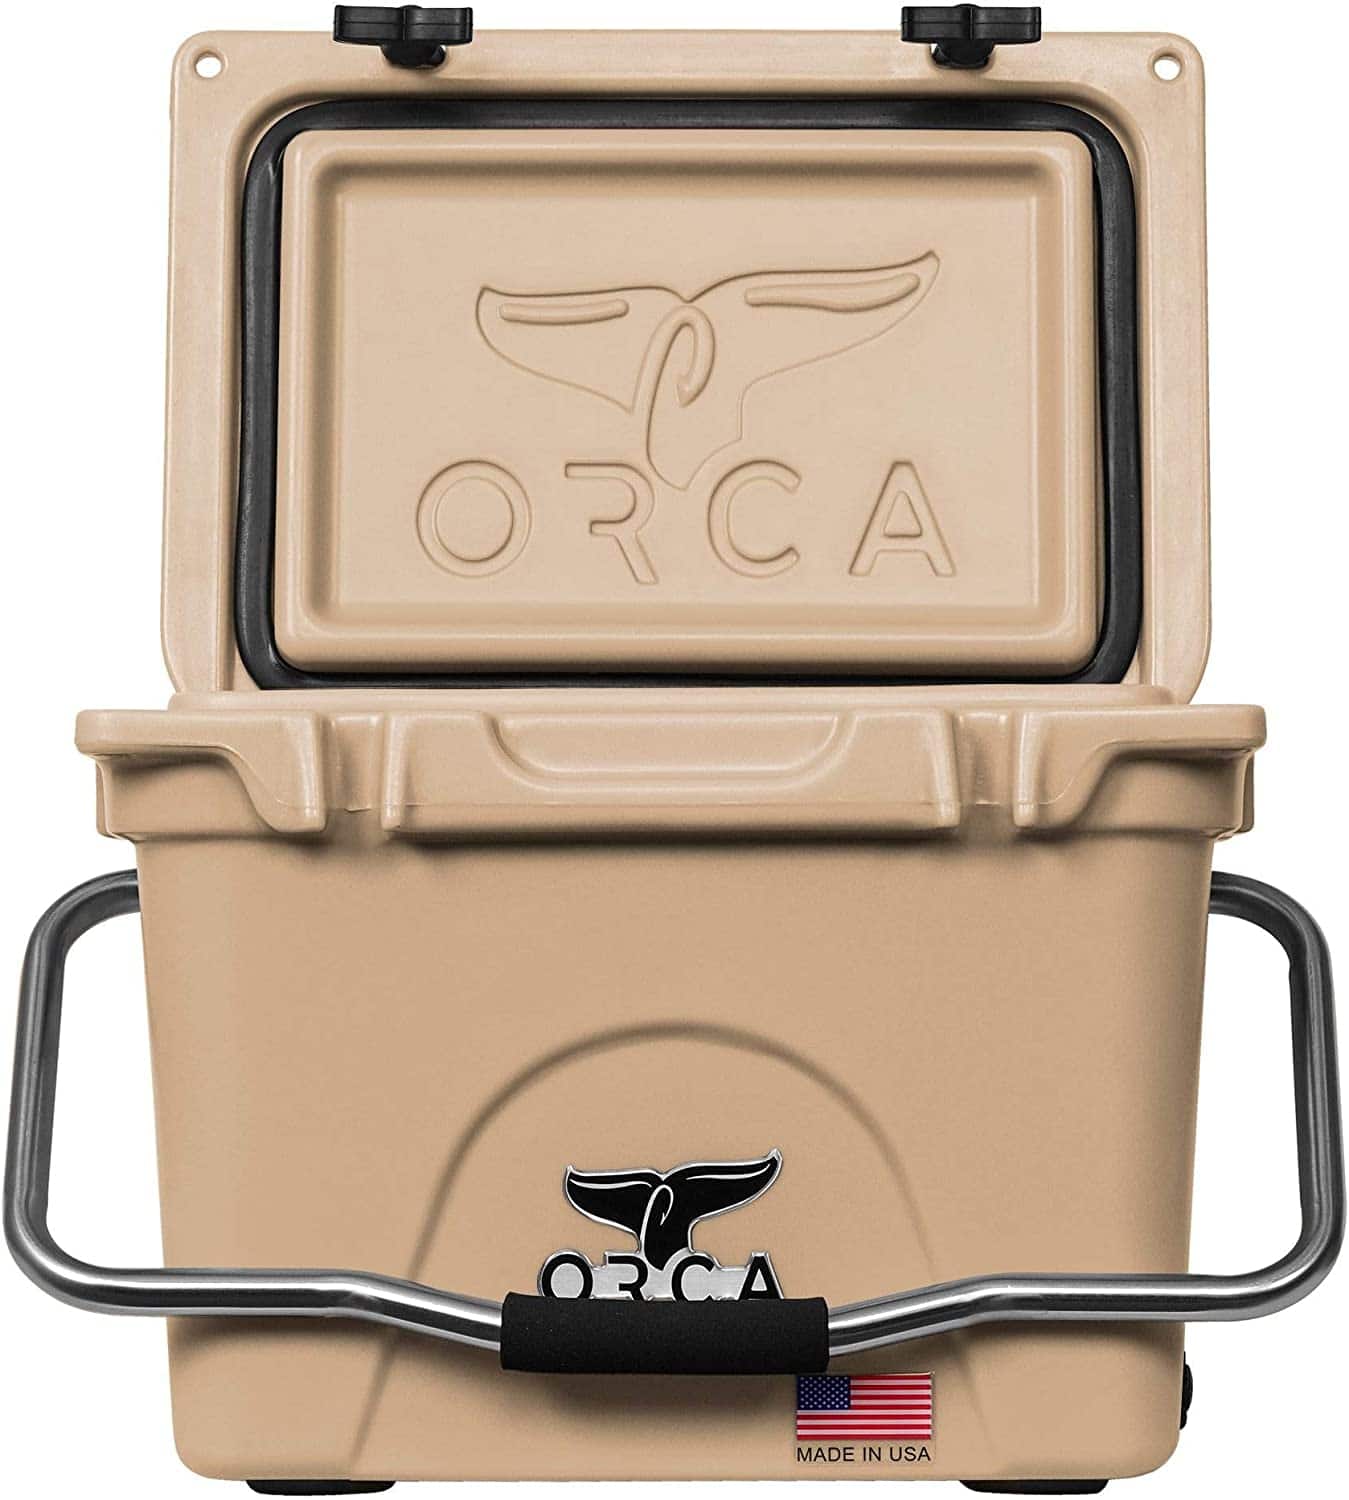 Orca cooler - a great gift idea for road trippers